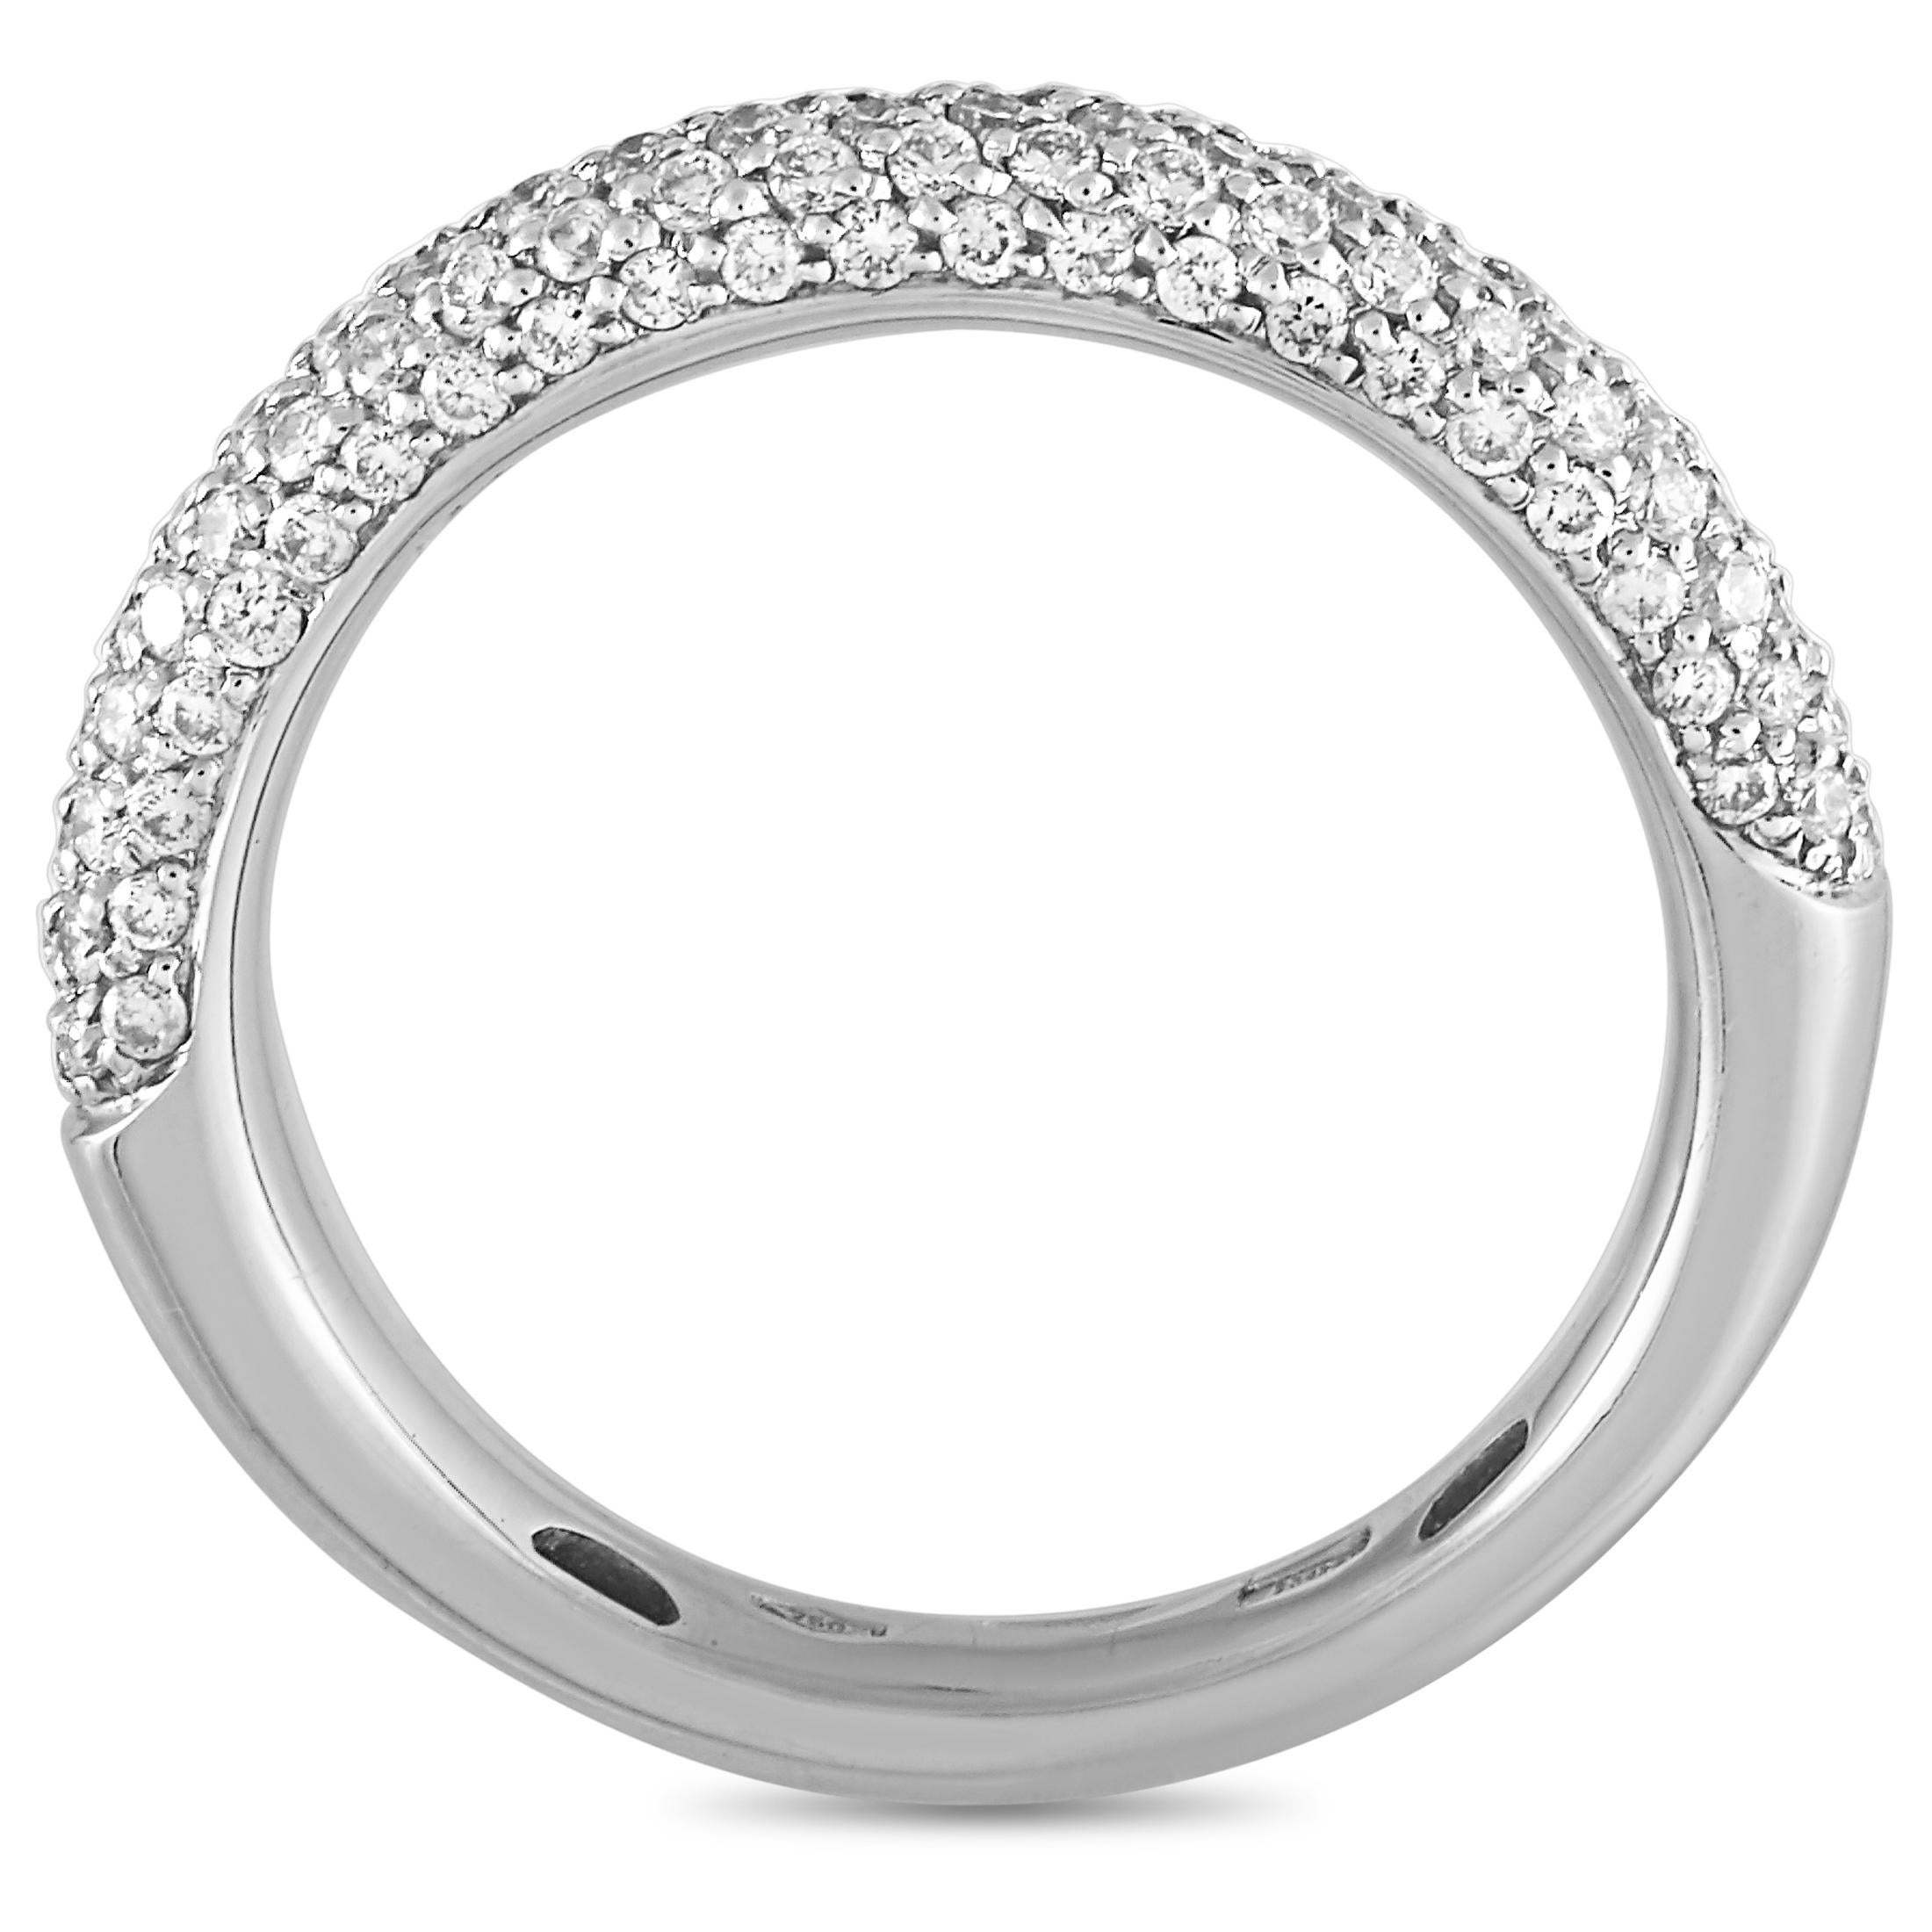 This Oro Trend ring is made out of 18K white gold and diamonds that total 0.69 carats. The ring weighs 4.4 grams and boasts band thickness of 3 mm and top height of 3 mm, while top dimensions measure 3 by 22 mm.

Offered in brand new condition, this